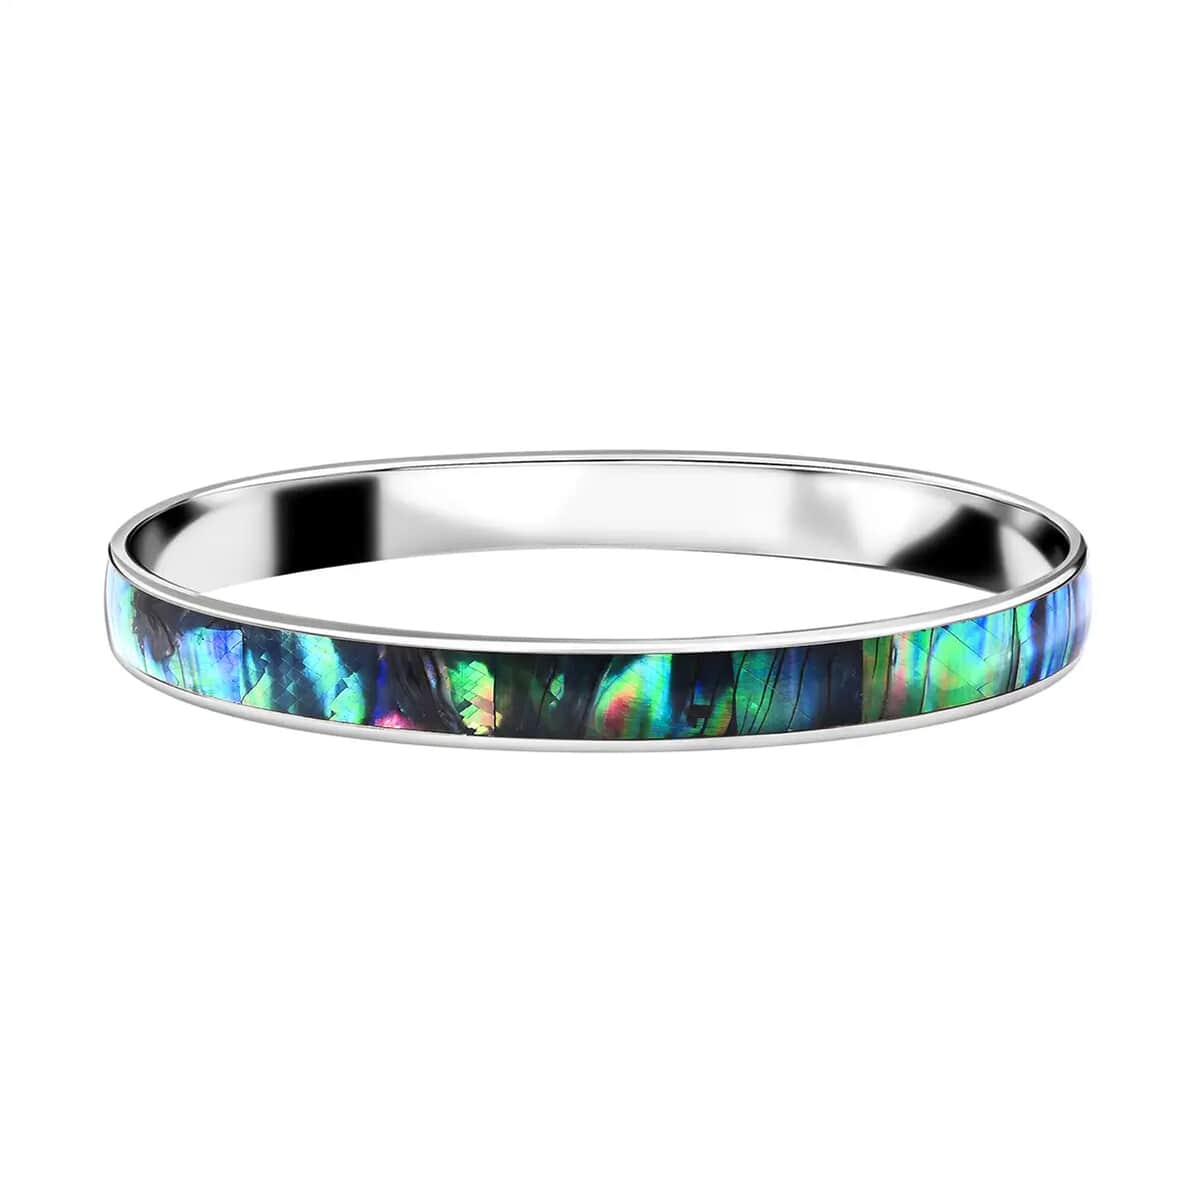 Abalone Shell Bangle Bracelet in Stainless Steel, Enamel Bracelet, Fashion Beach Jewelry For Women, Gift For Her (8 in) image number 0